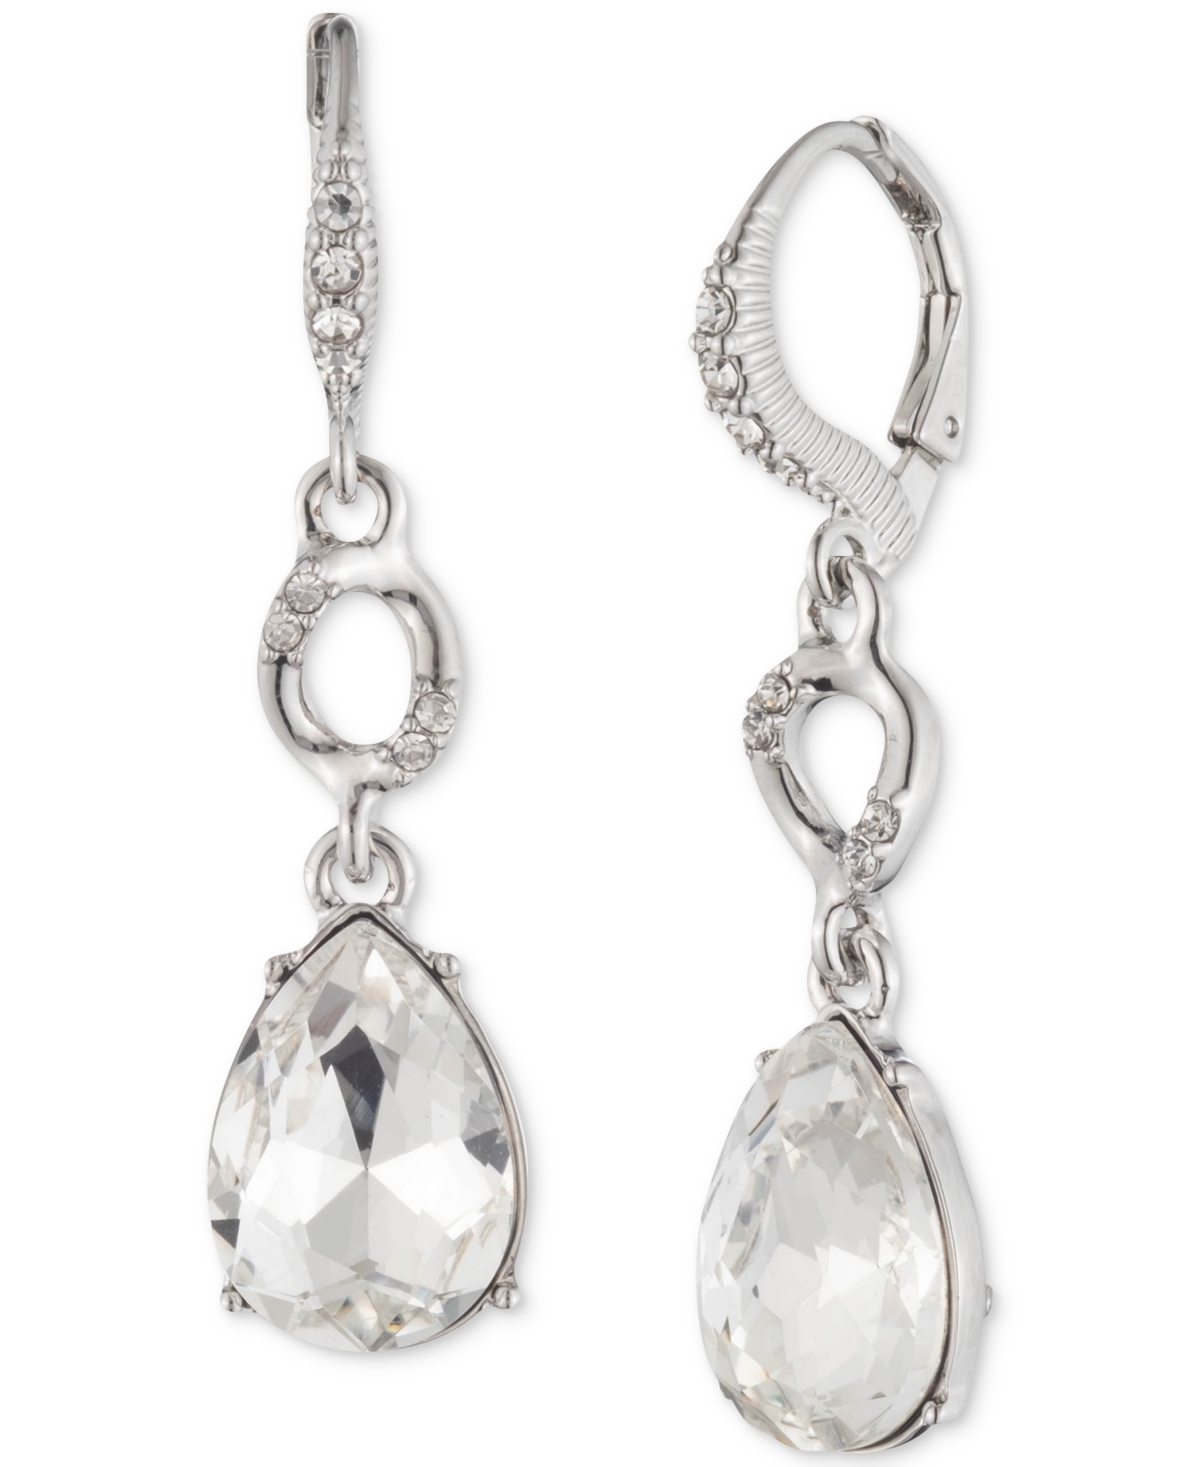 Givenchy Silver-Tone Circle & Pear-Shape Crystal Double Drop Earrings